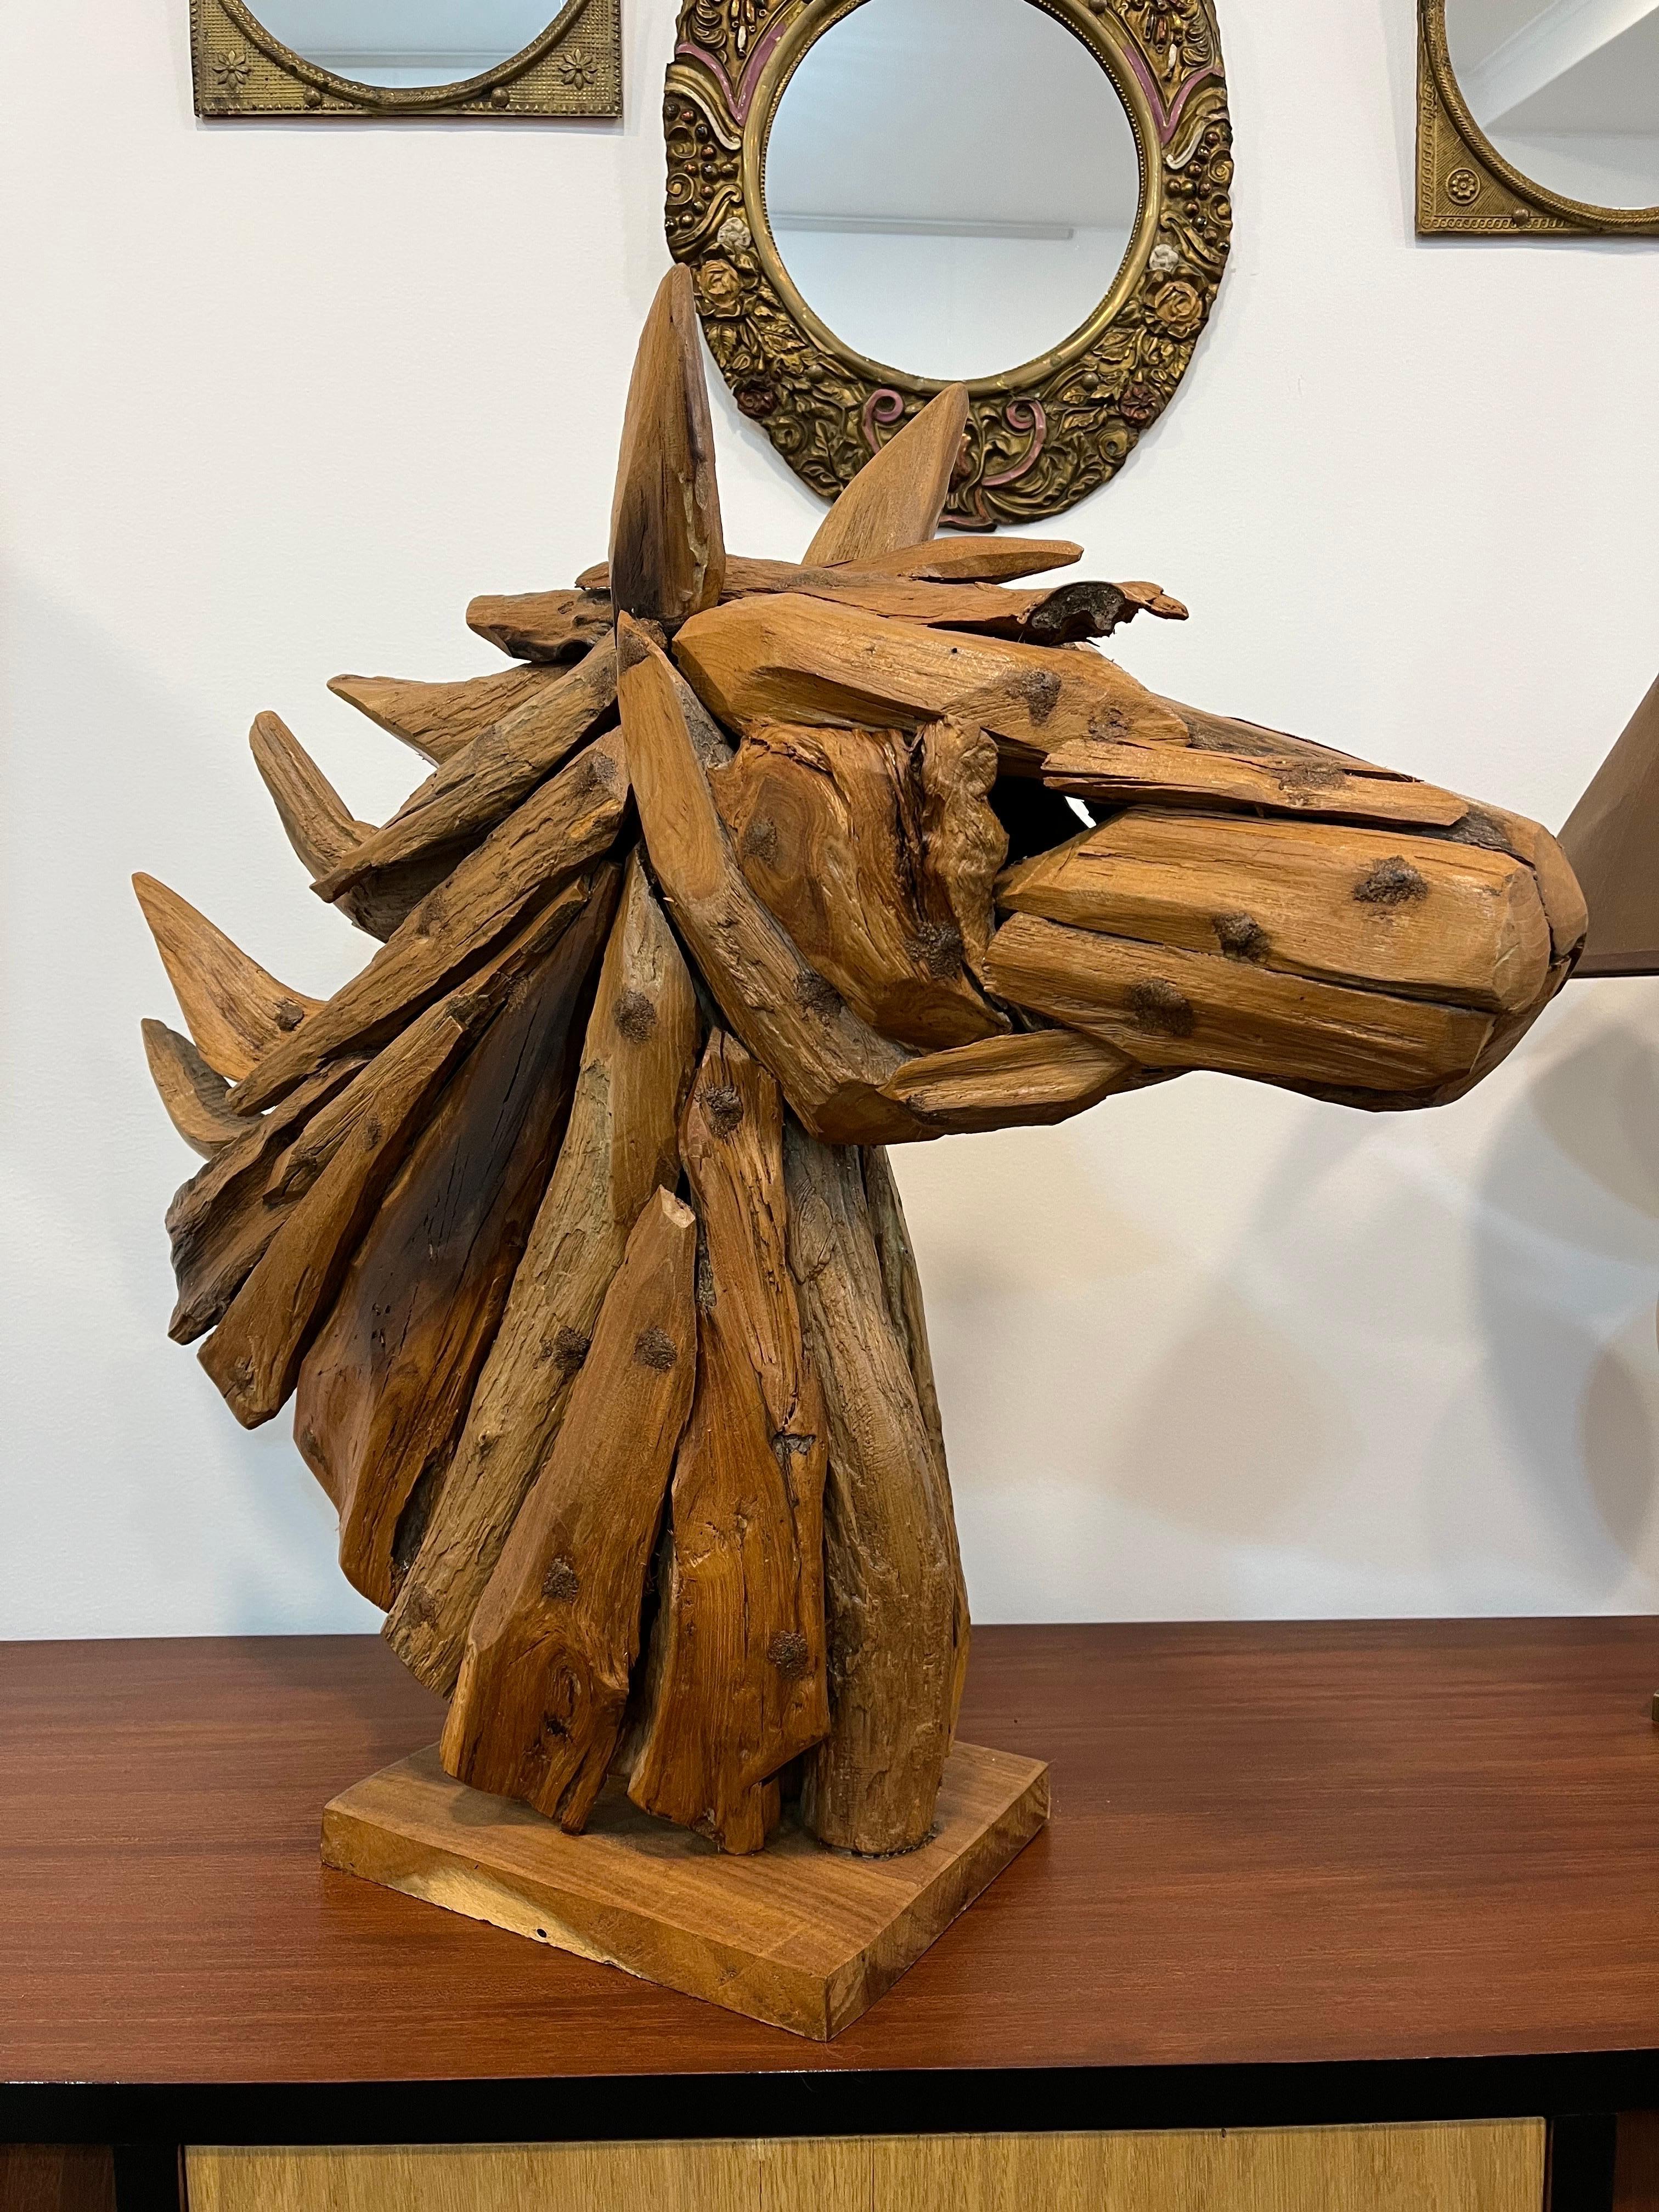 Horse head sculpture in teak root. Contempory sculpture made by an indonesian craftsman sculptor (Bali). It was assembled with pieces of teak roots.
A colorless glaze was applied to protect the wood.
Spectacular piece !
